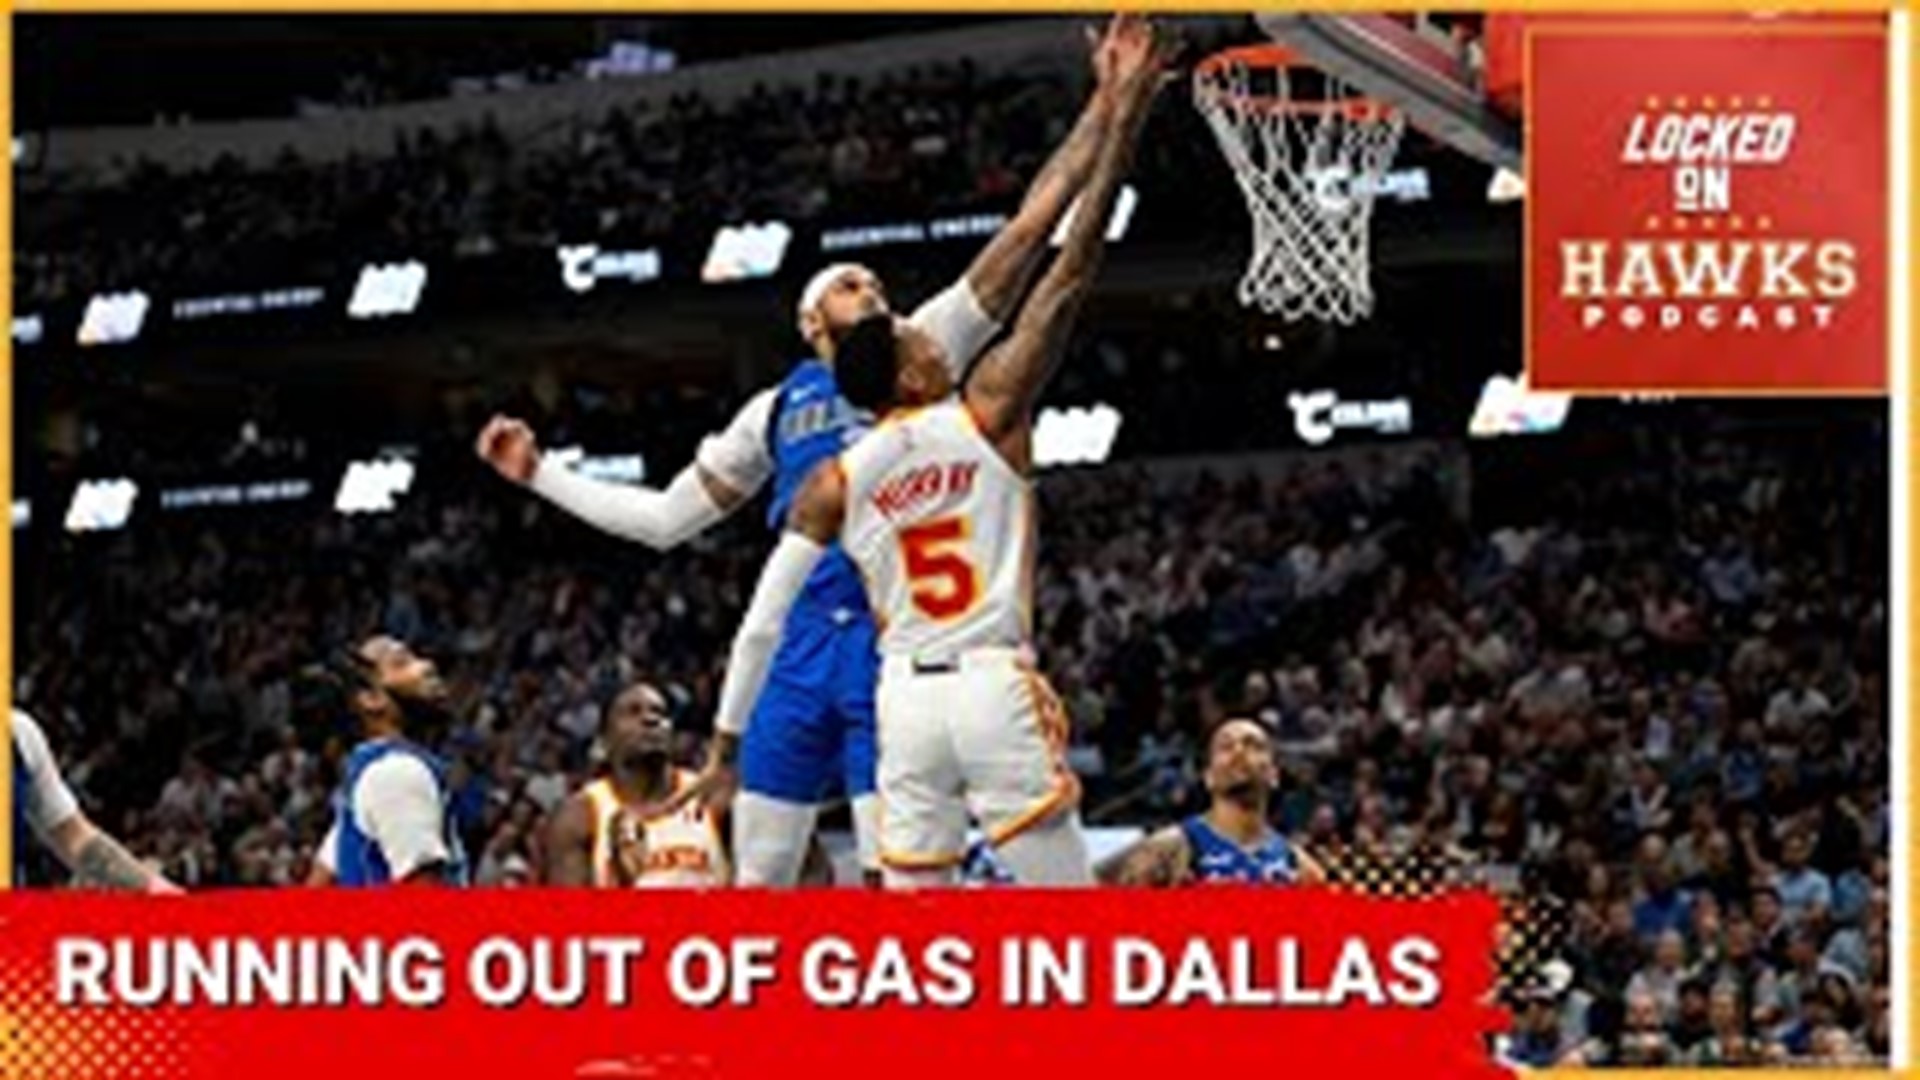 Brad Rowland hosts episode No. 1688 of the Locked on Hawks podcast. The show breaks down Thursday’s game between the Atlanta Hawks and the Dallas Mavericks.